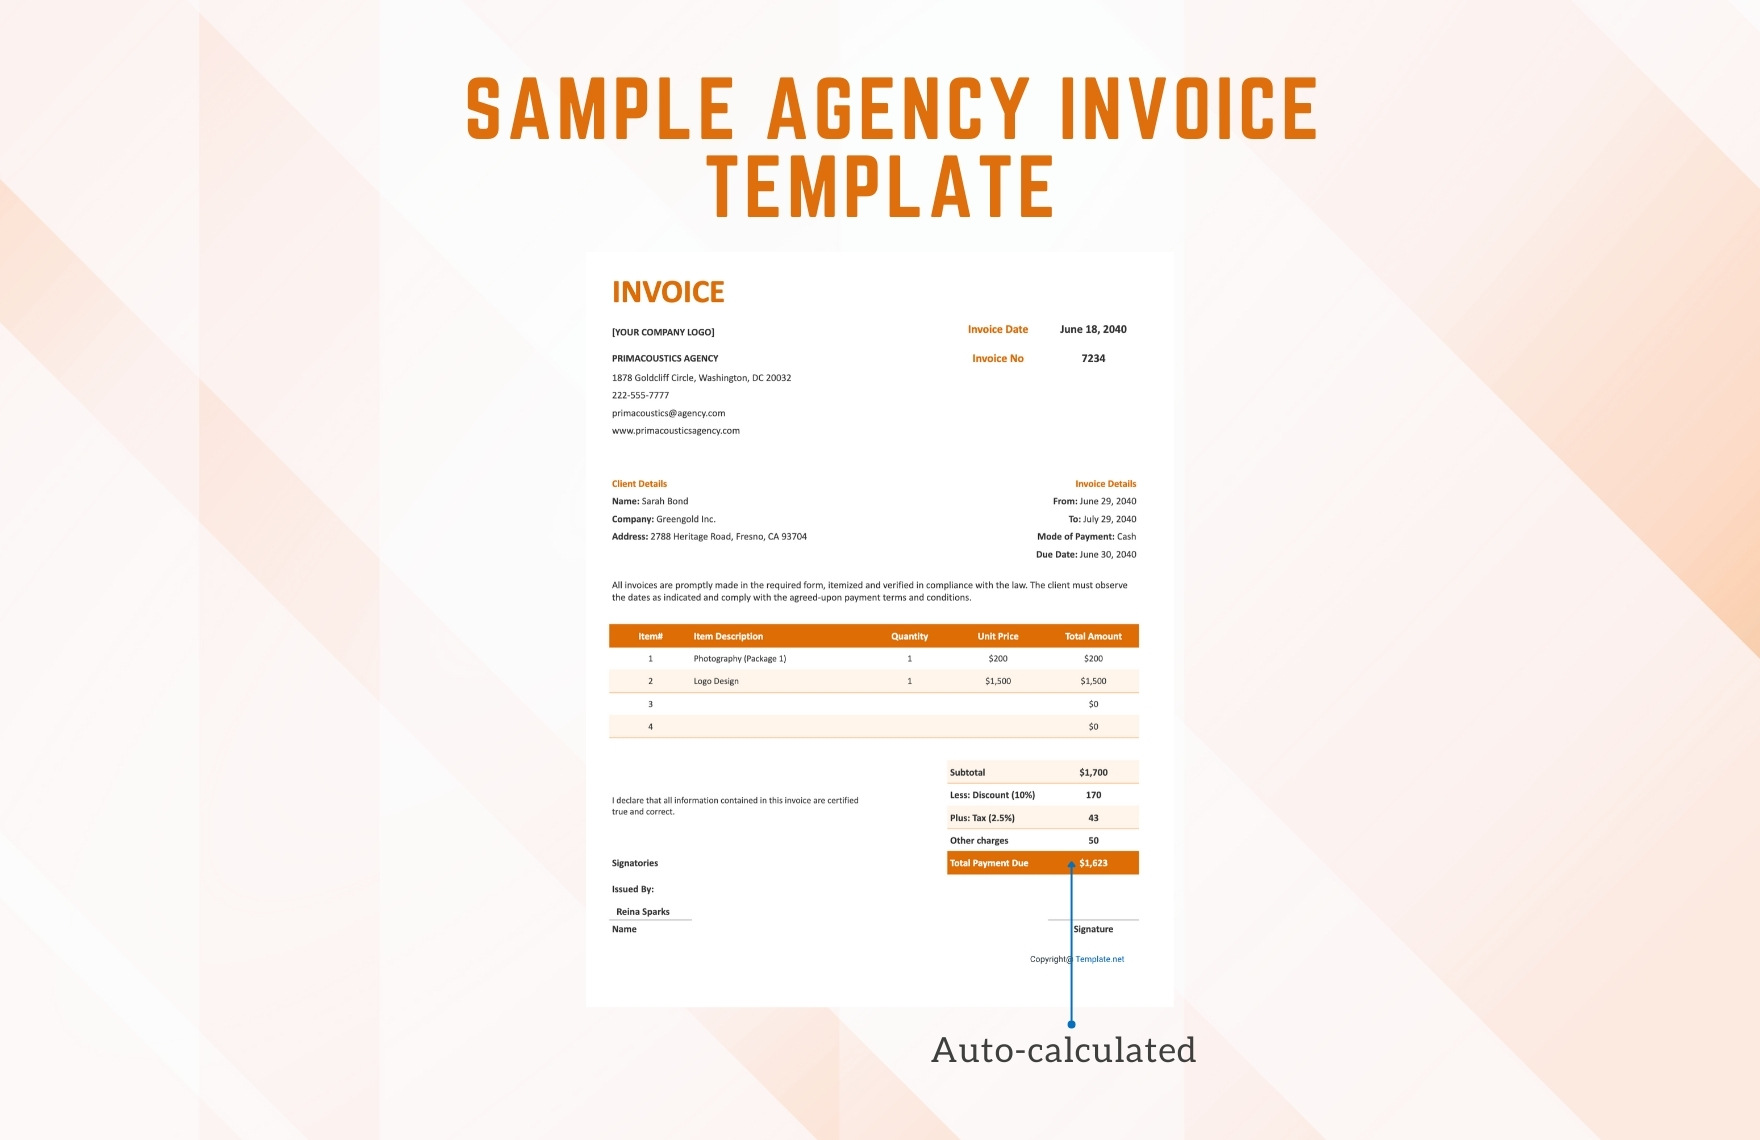 Sample Agency Invoice template